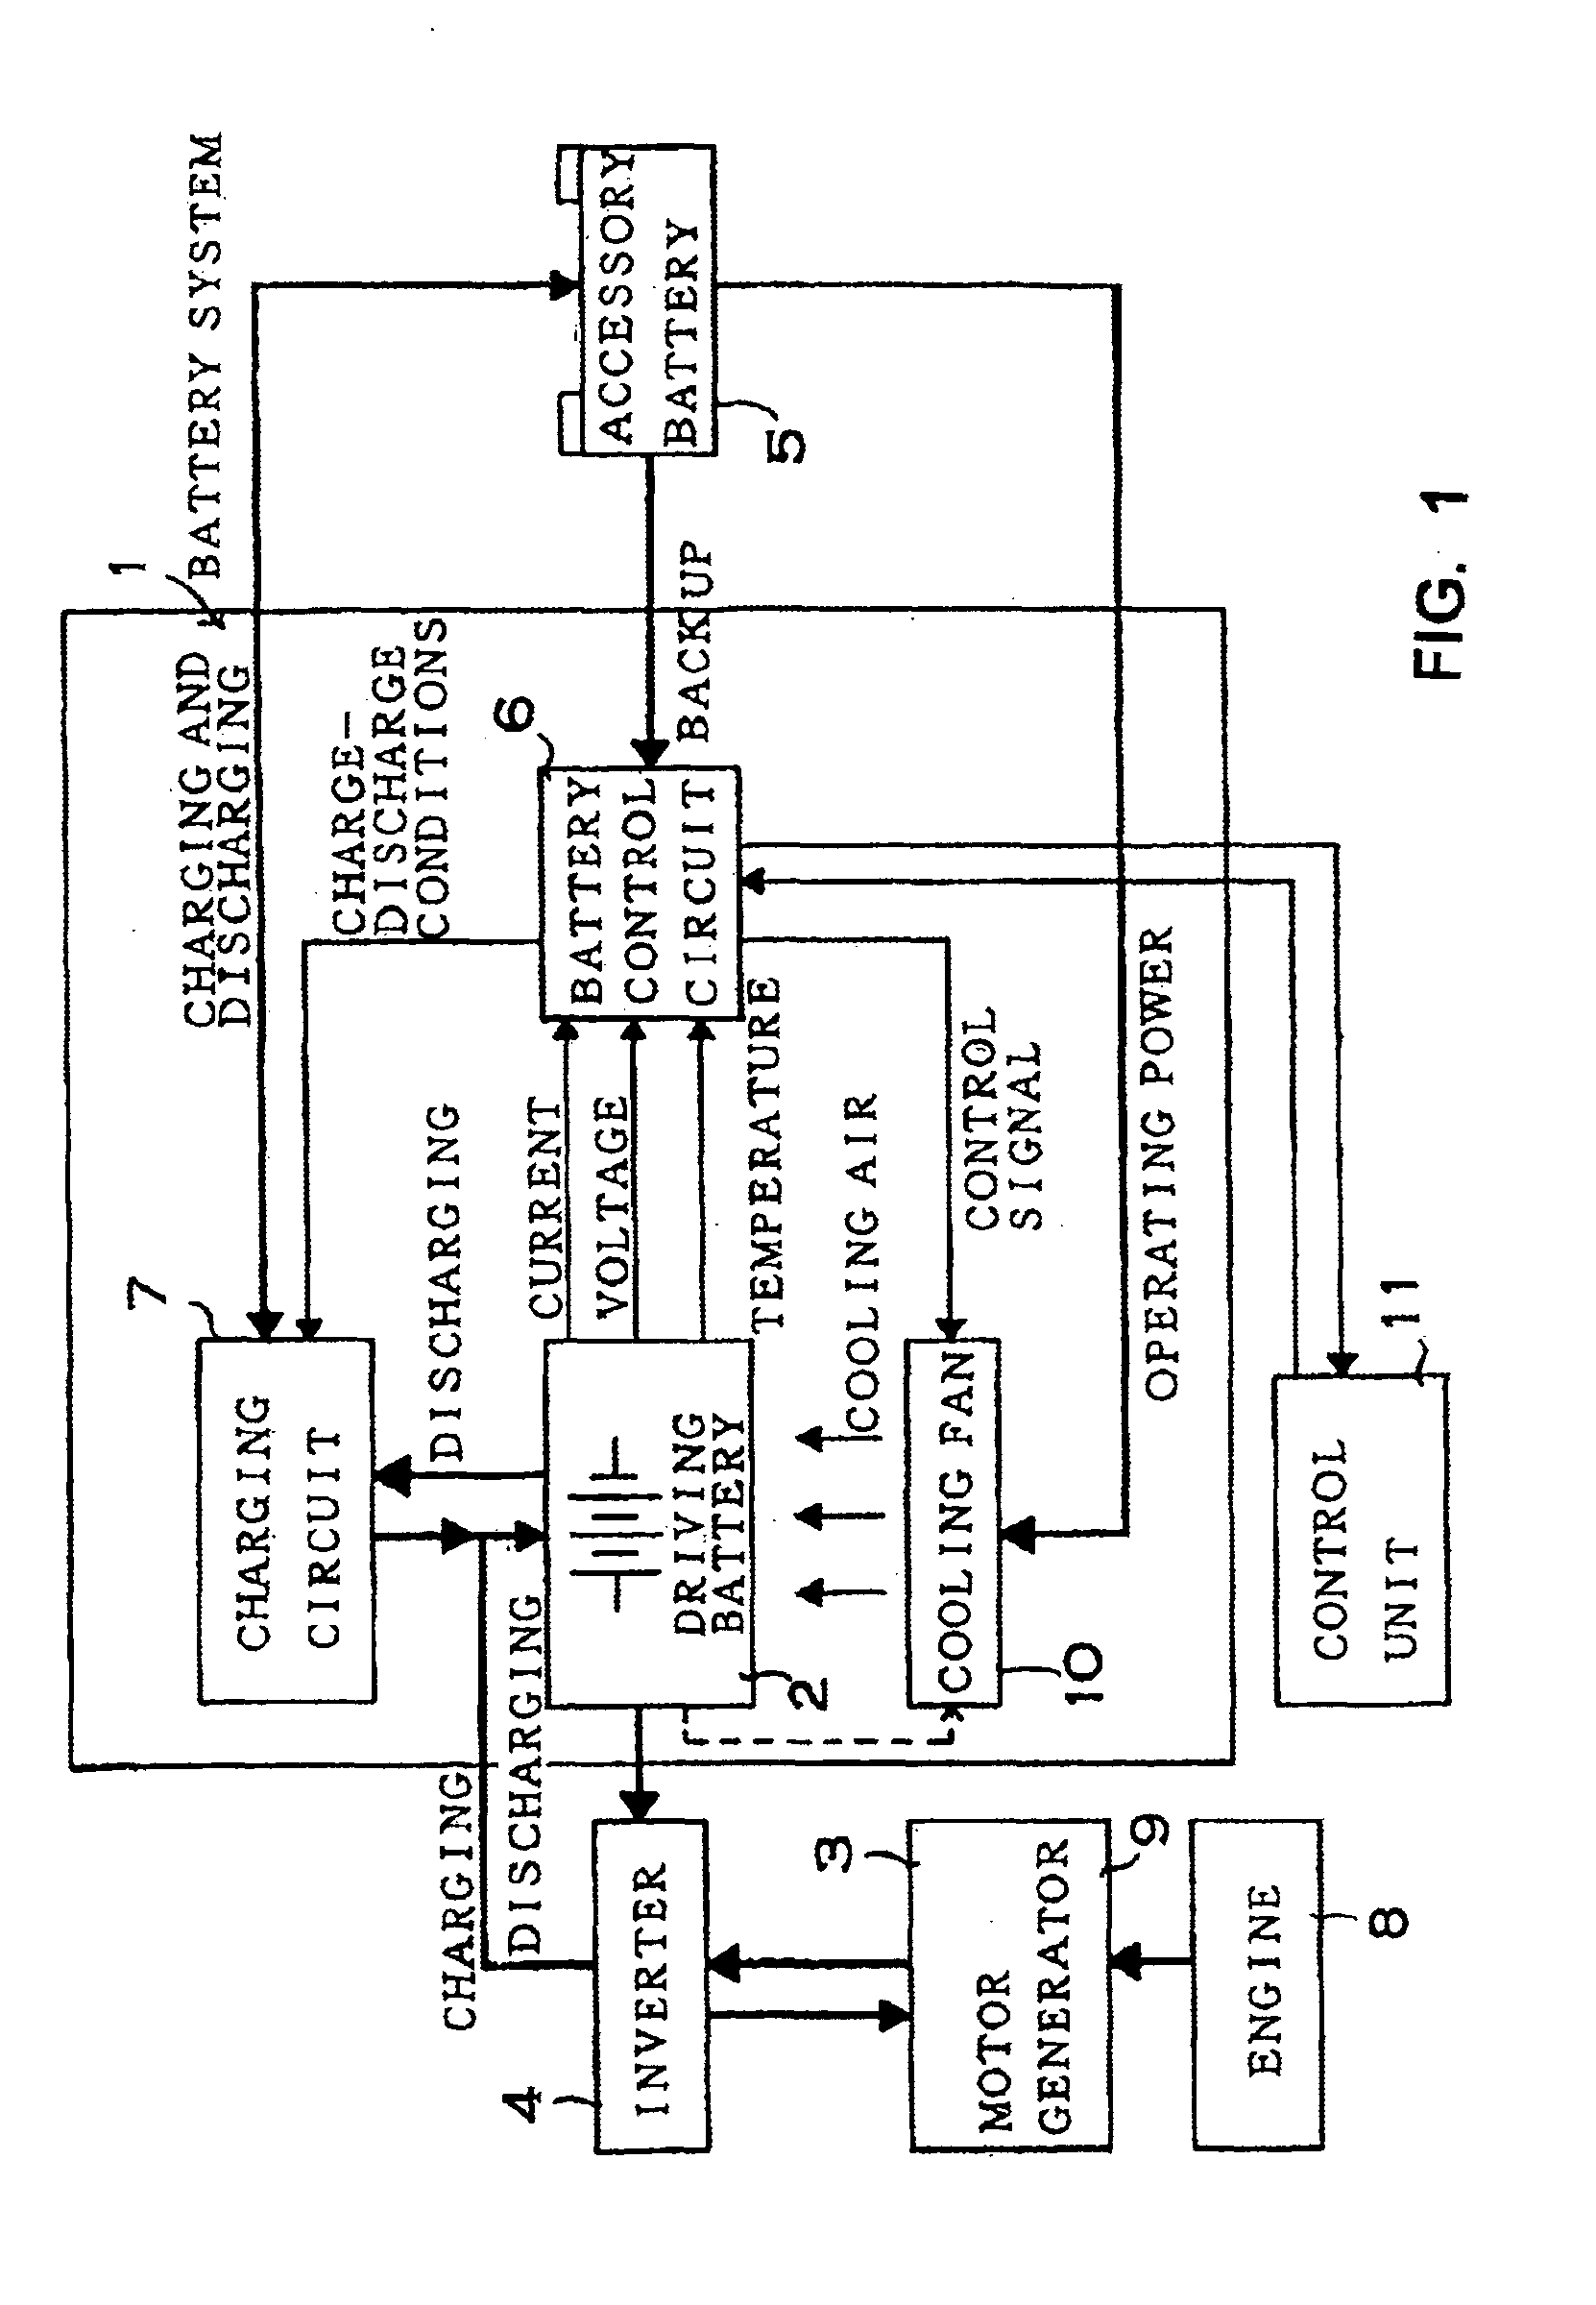 Power source apparatus for an electric automobile